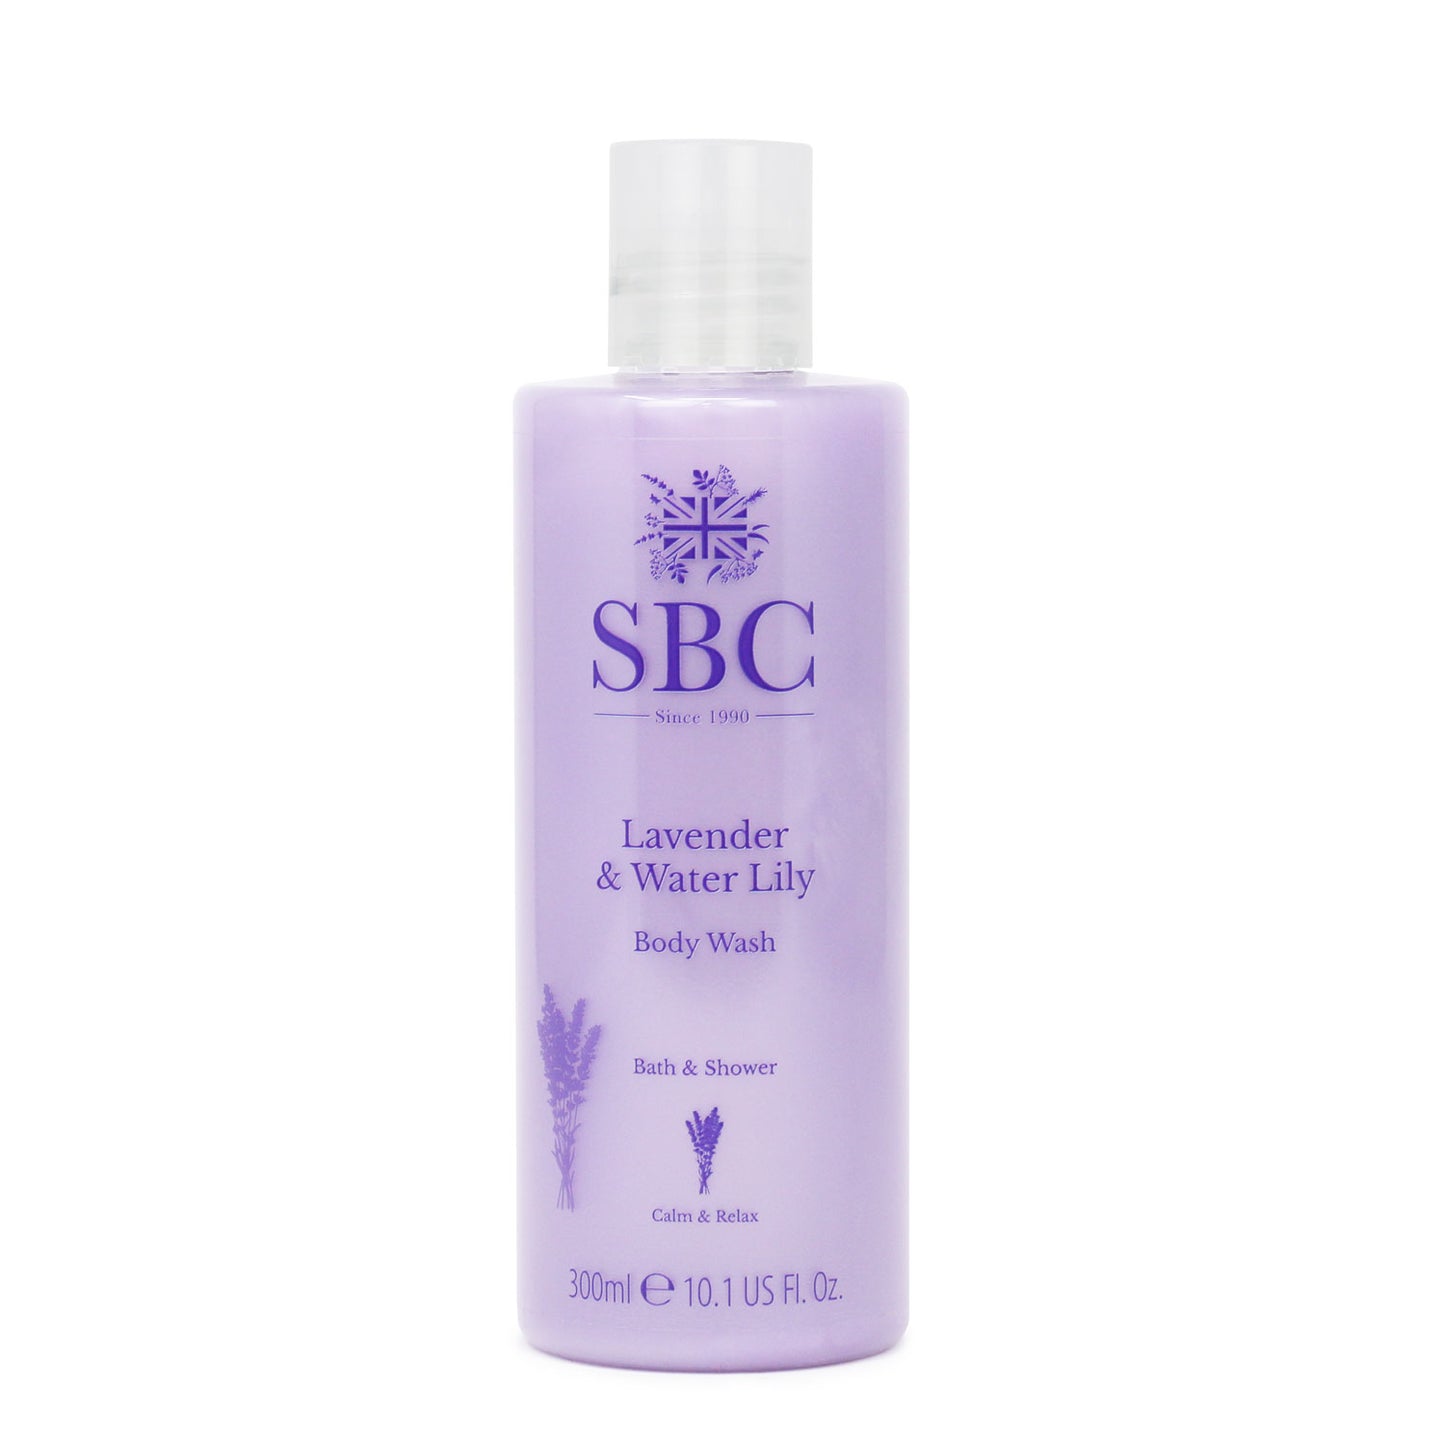 300ml Lavender & Water Lily Body Wash on a white background